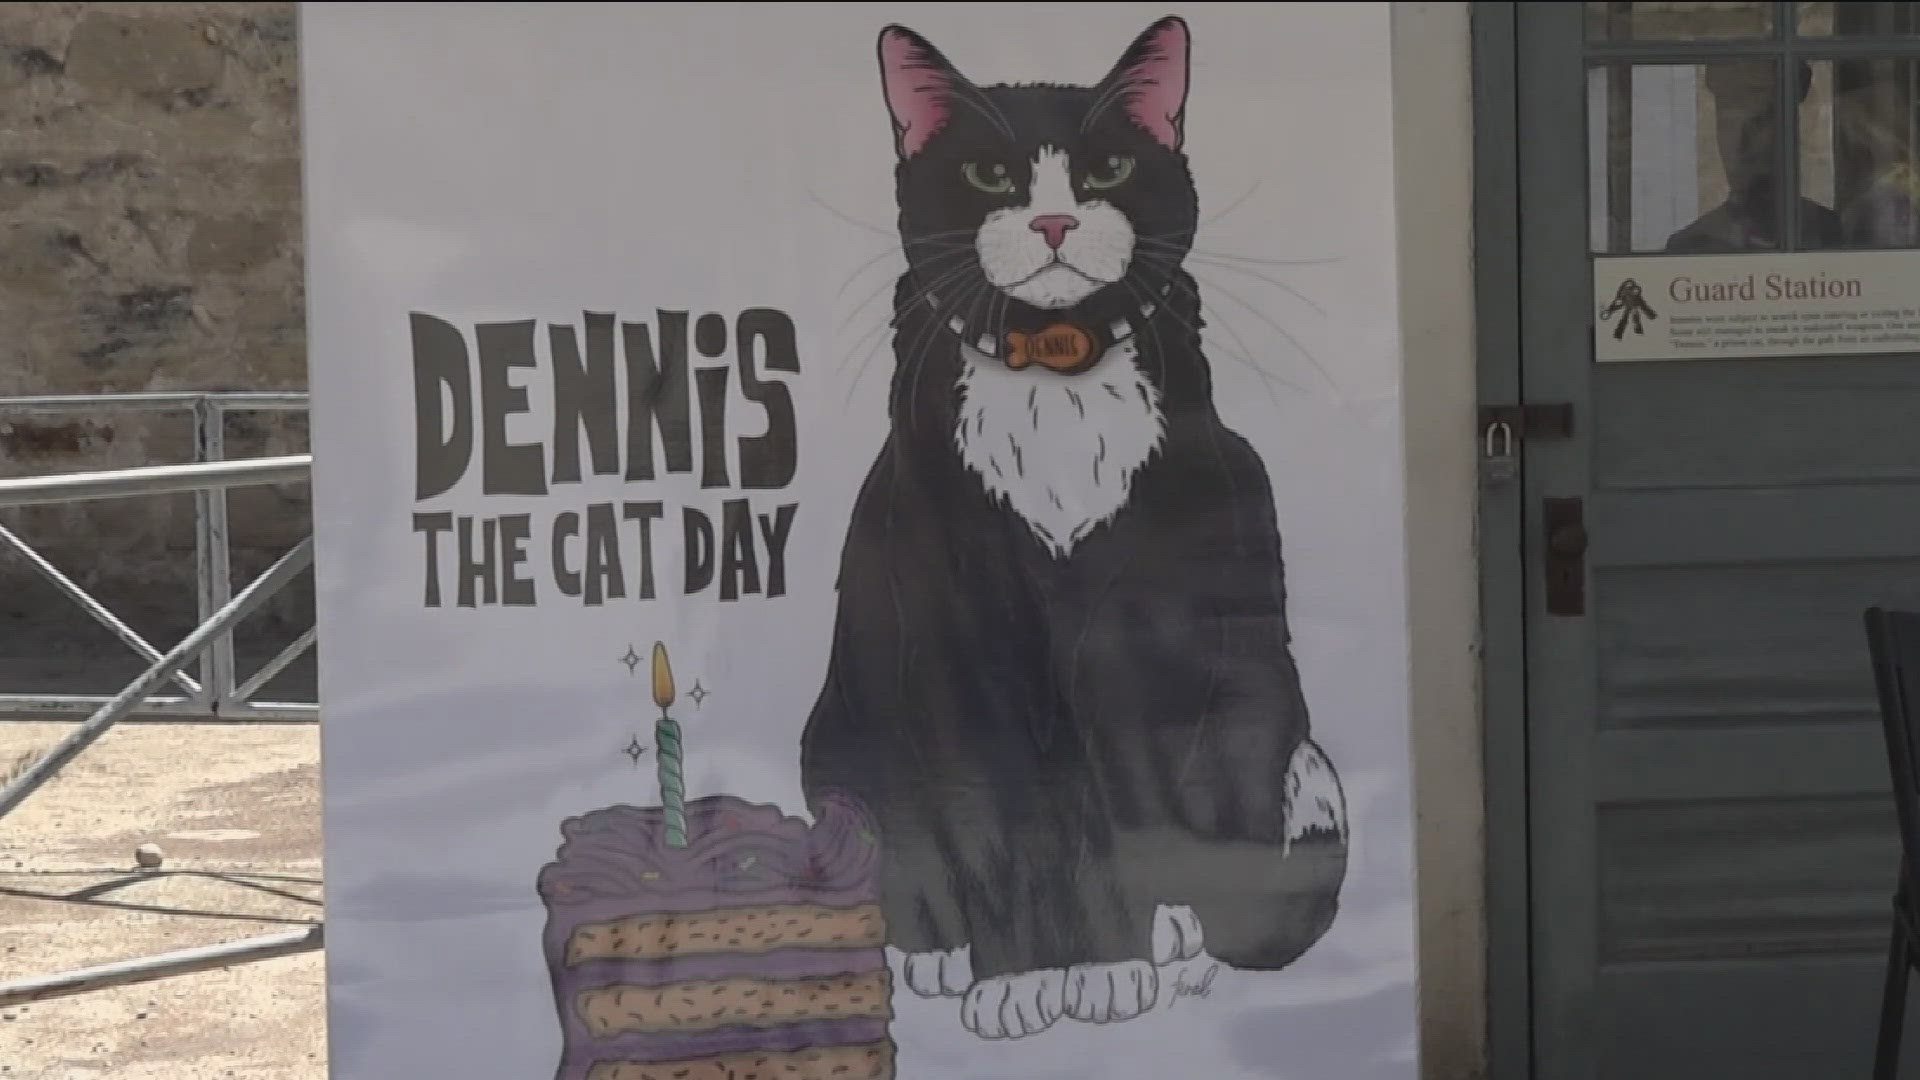 During his 16 years at the Old Pen, Dennis brought comfort to the prisoners and left a legacy.